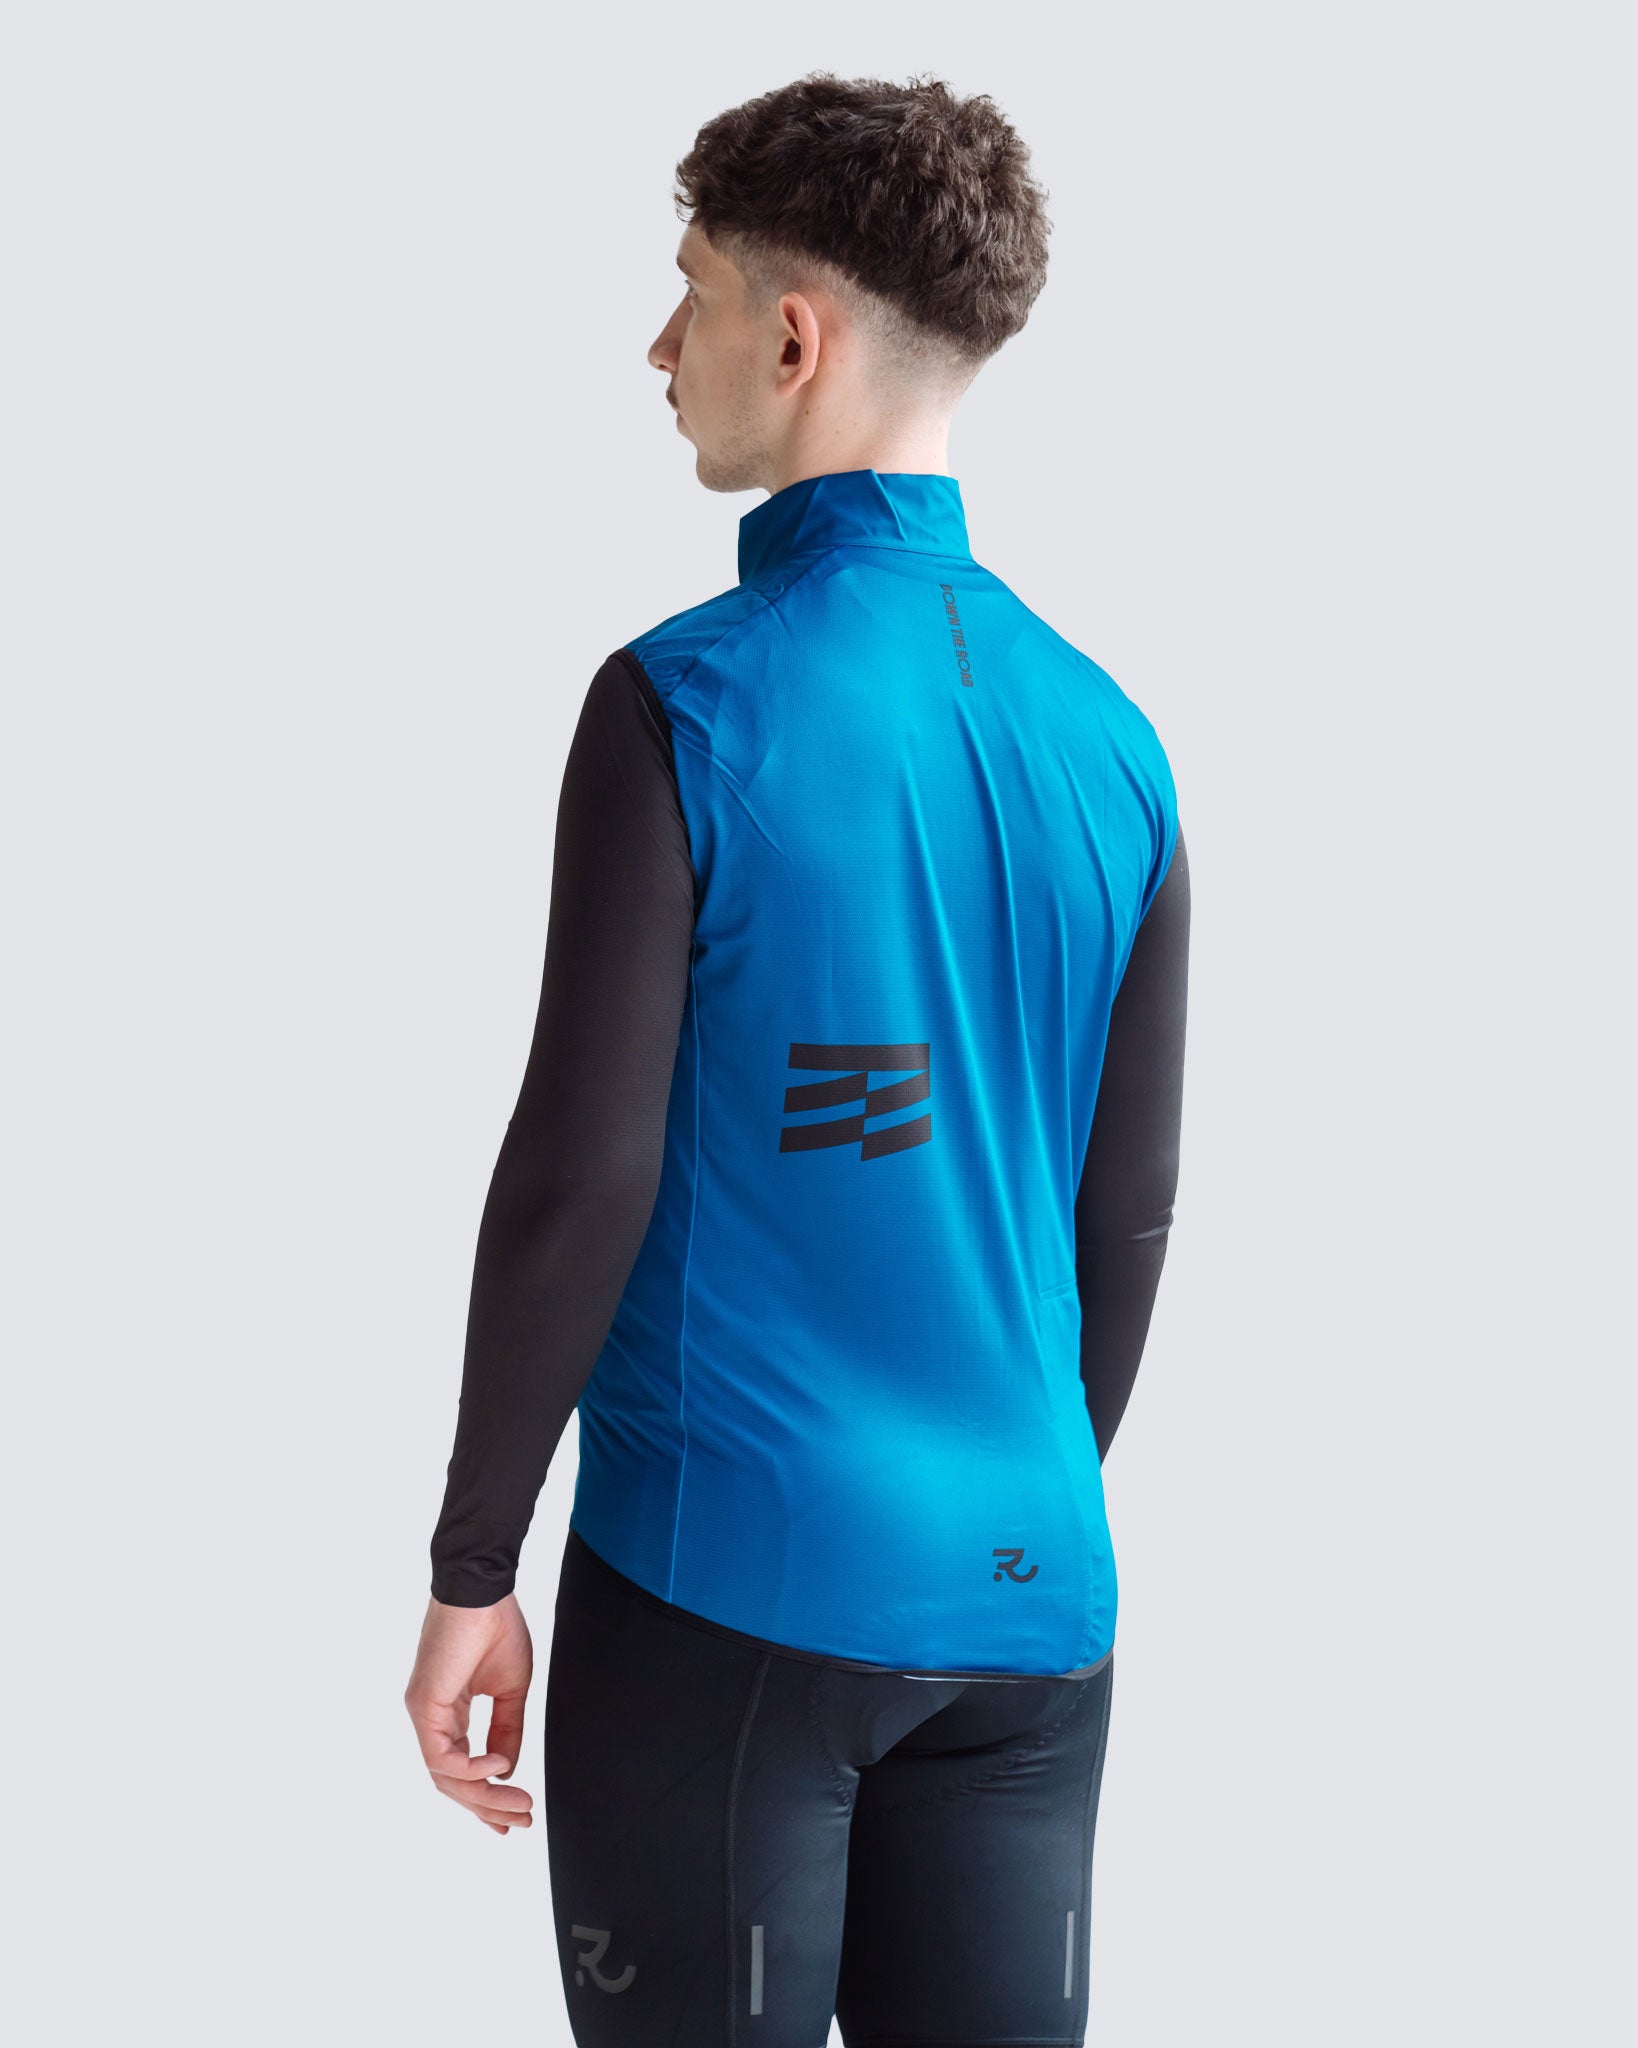 Wavy teal men cycling vest back side view